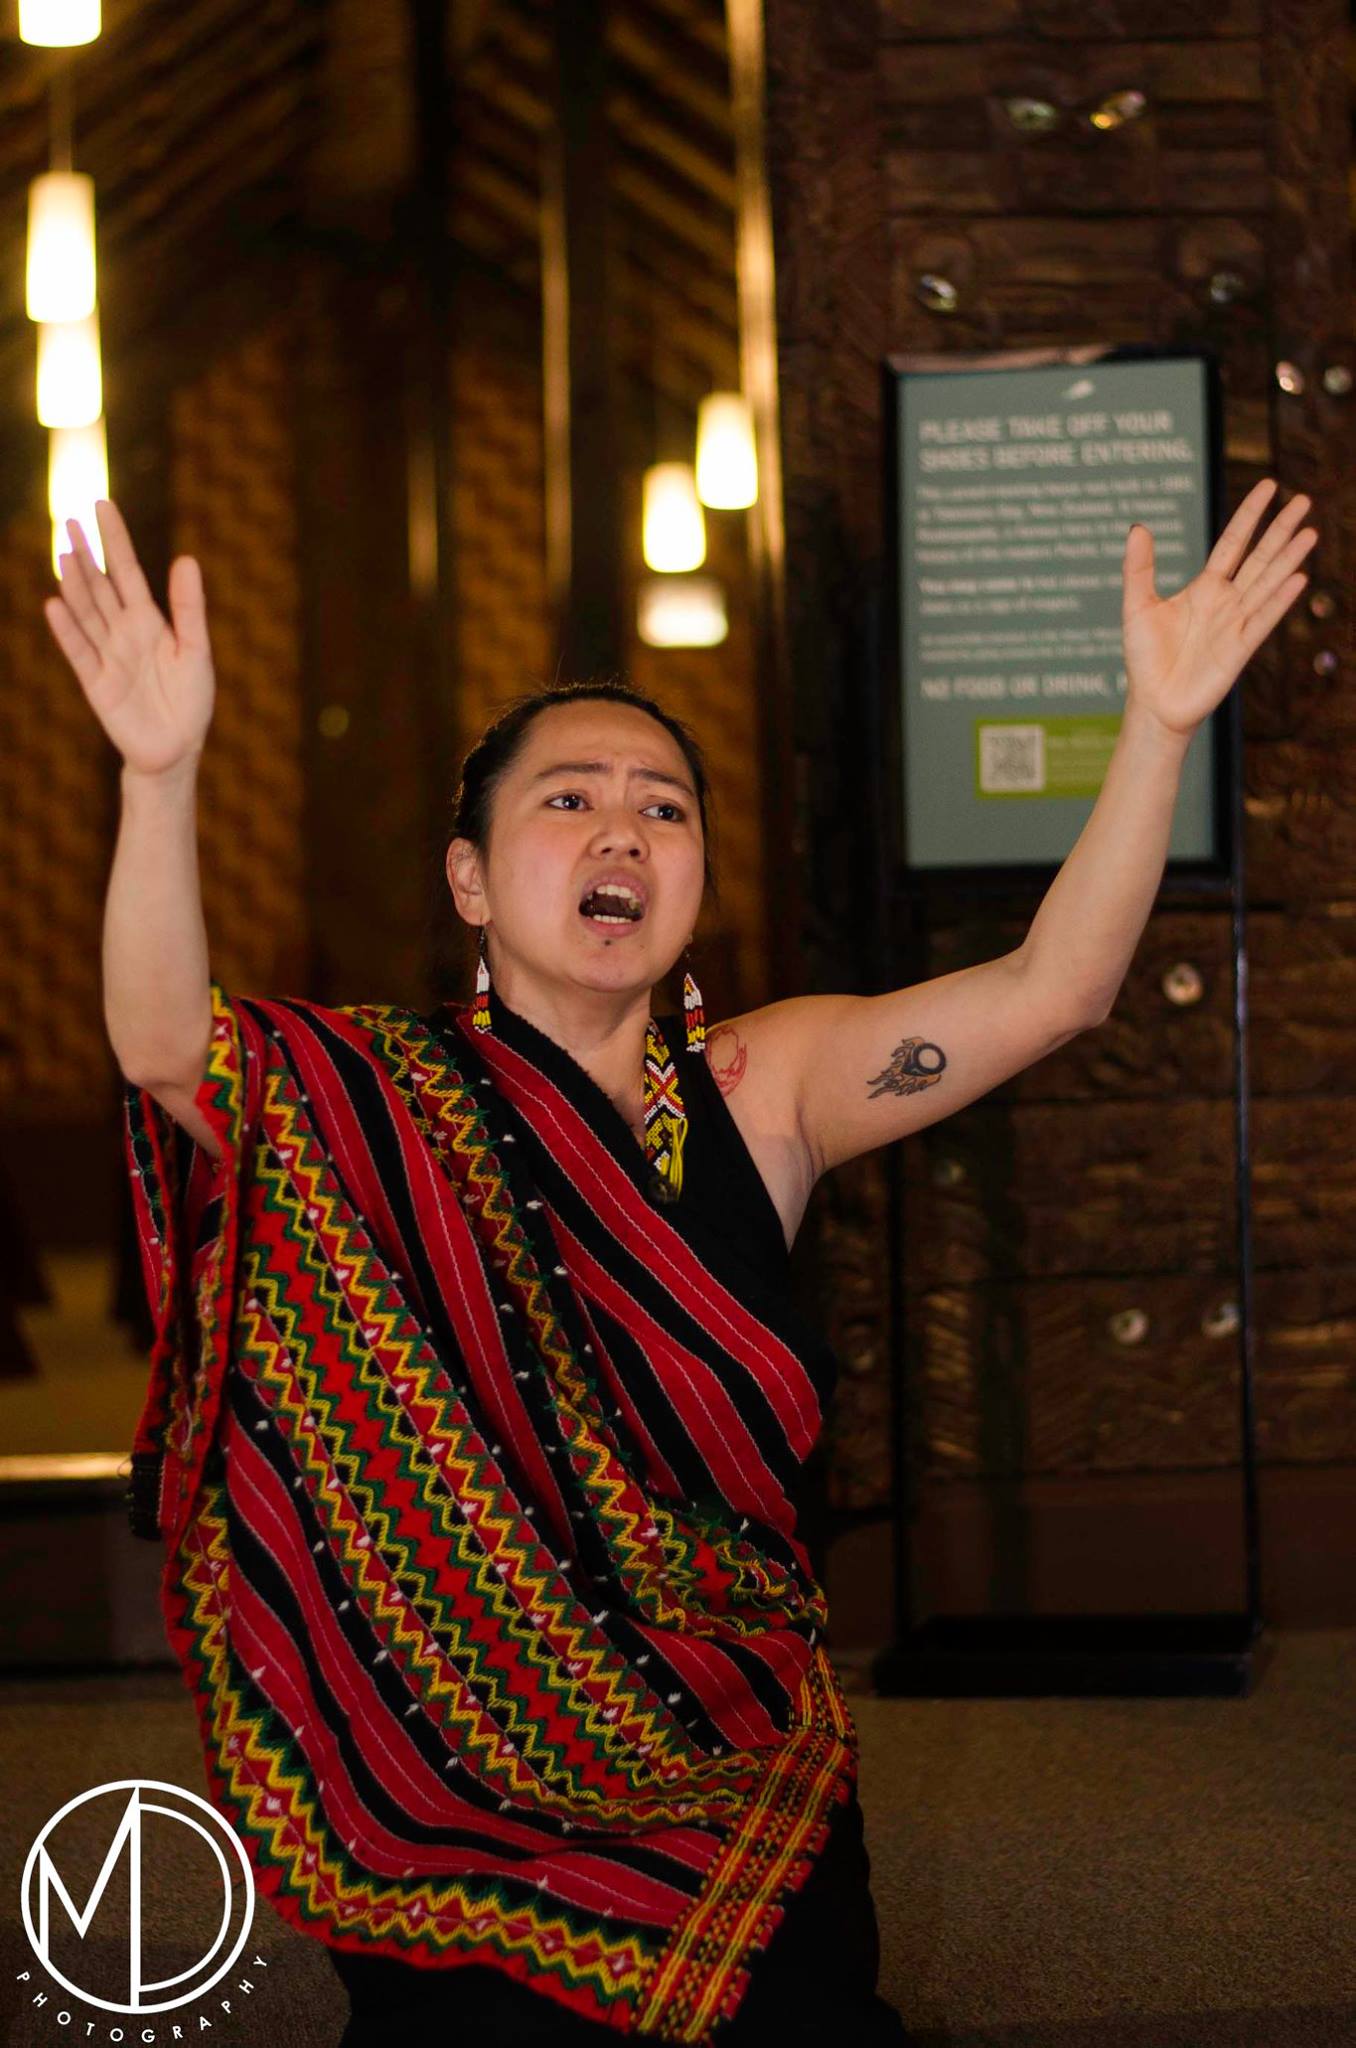 Co-host Je Nepomuceno singing during ceremony. (c) Field Museum of Natural History - CC BY-NC 4.0